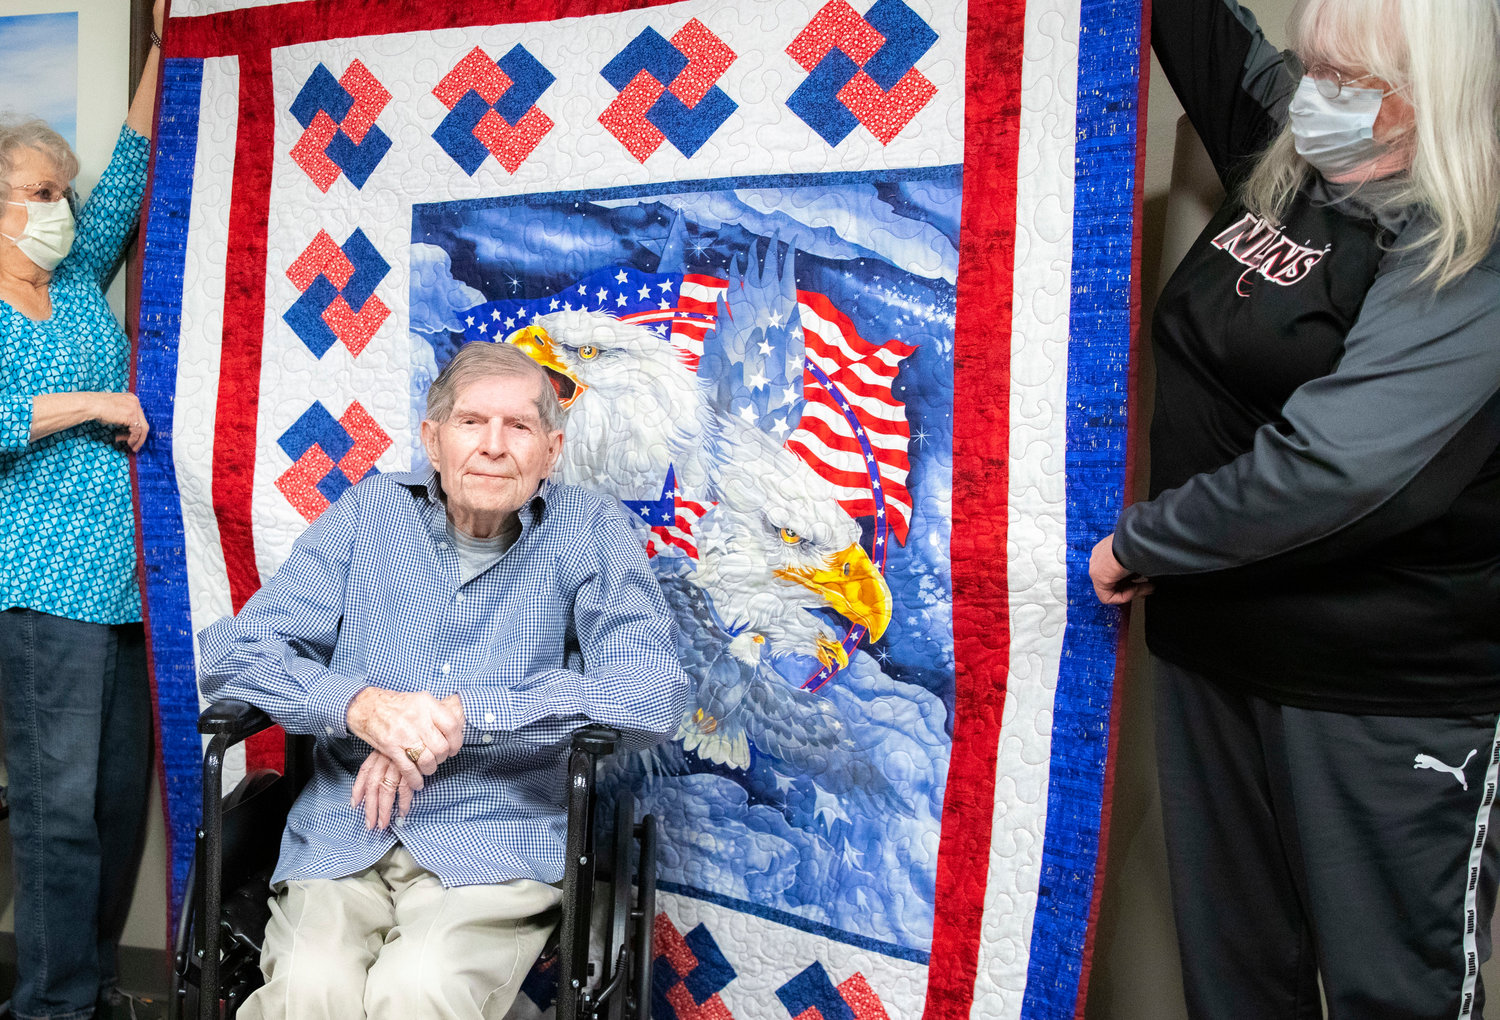 James F. Van Ackeren, a WWII veteran who served as a staff sergeant in the U.S. Army, is presented with a blanket from Quilts of Valor at Woodland Estates in Chehalis on Thursday.